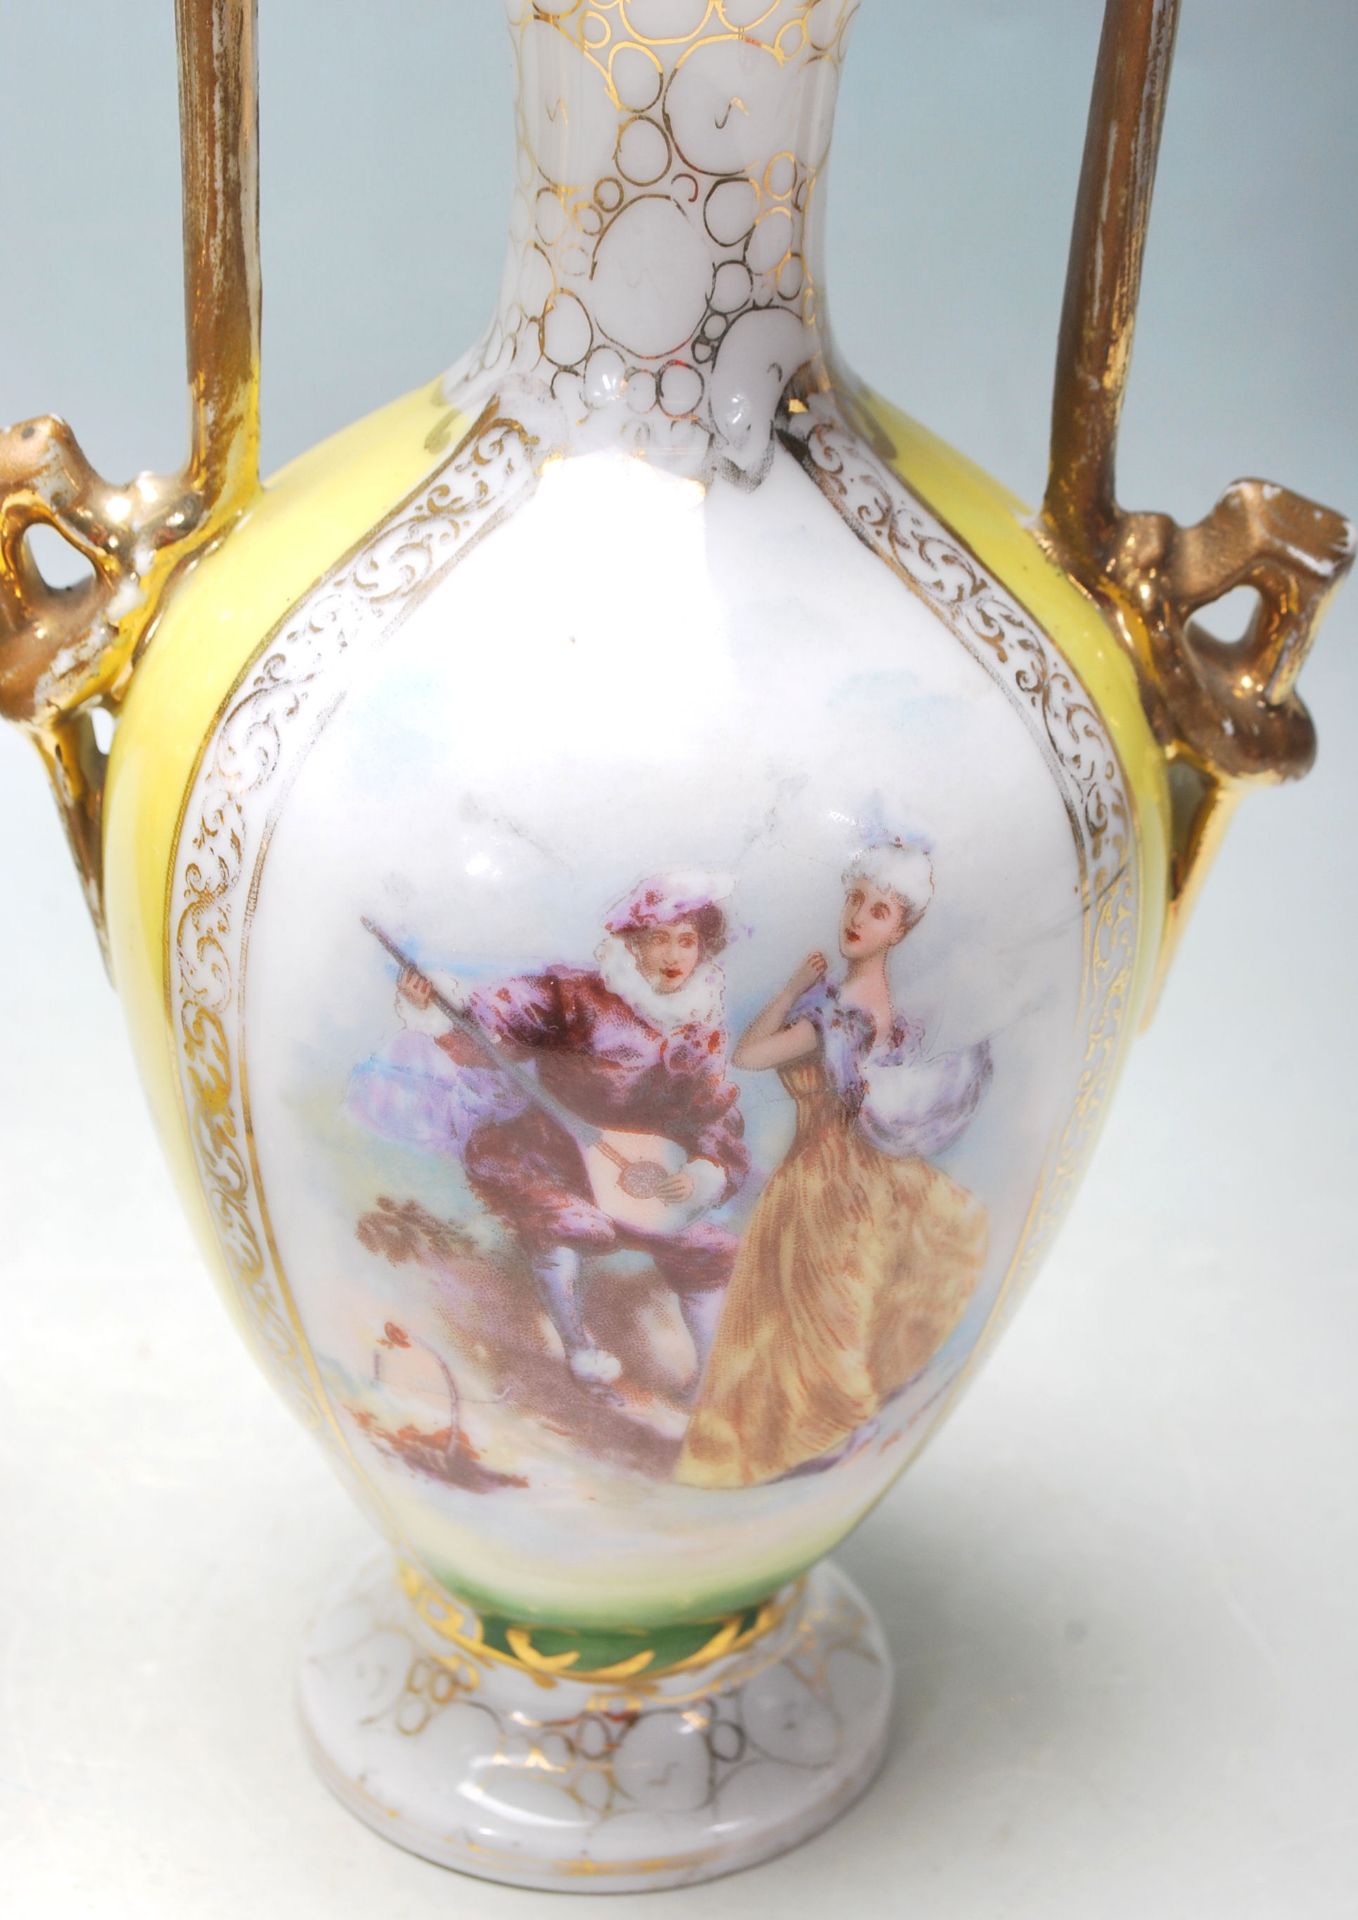 A PAIR OF GERMAN VASES BY VON SCHIERHOLZ 1900C - C.G. SCHIERHOLZ & SON - PAITED BY FR STAHL - Image 8 of 11